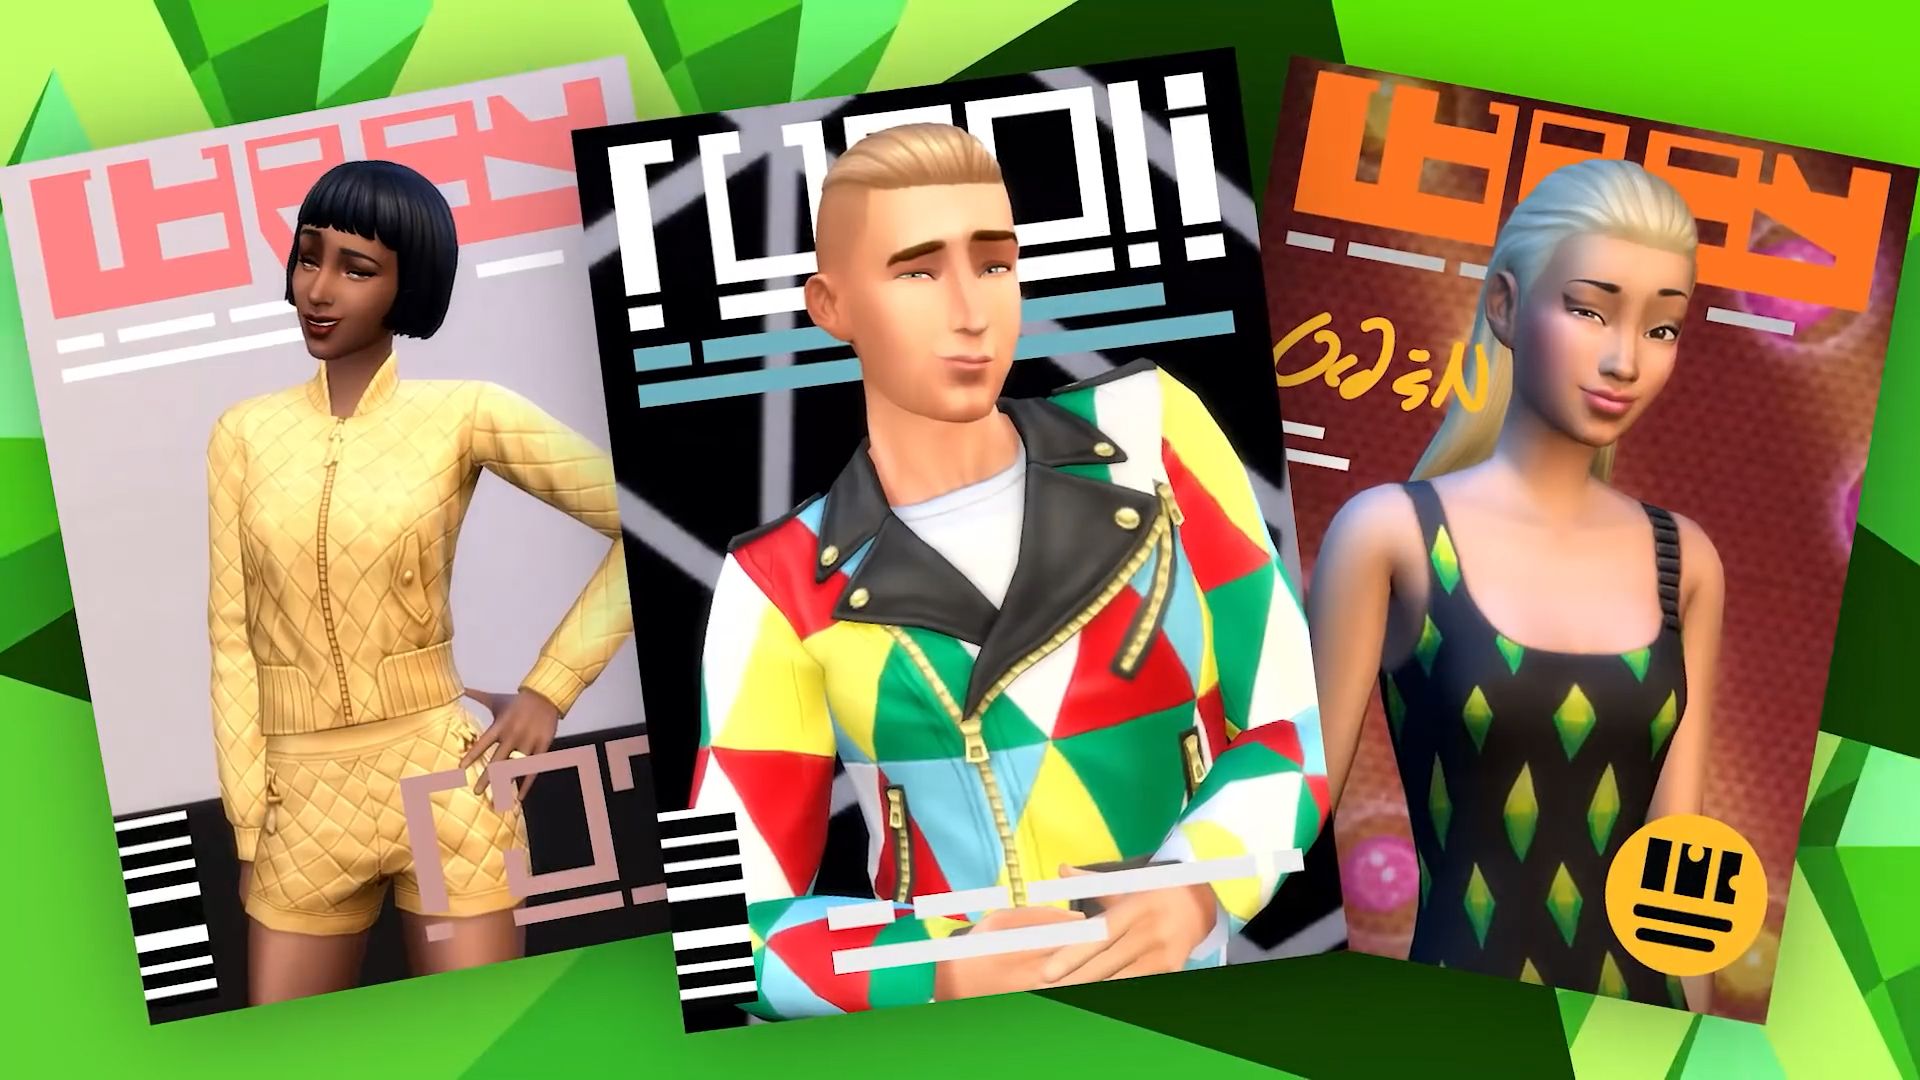 The Sims 4 Moschino Stuff is Now Available on PC / Mac!